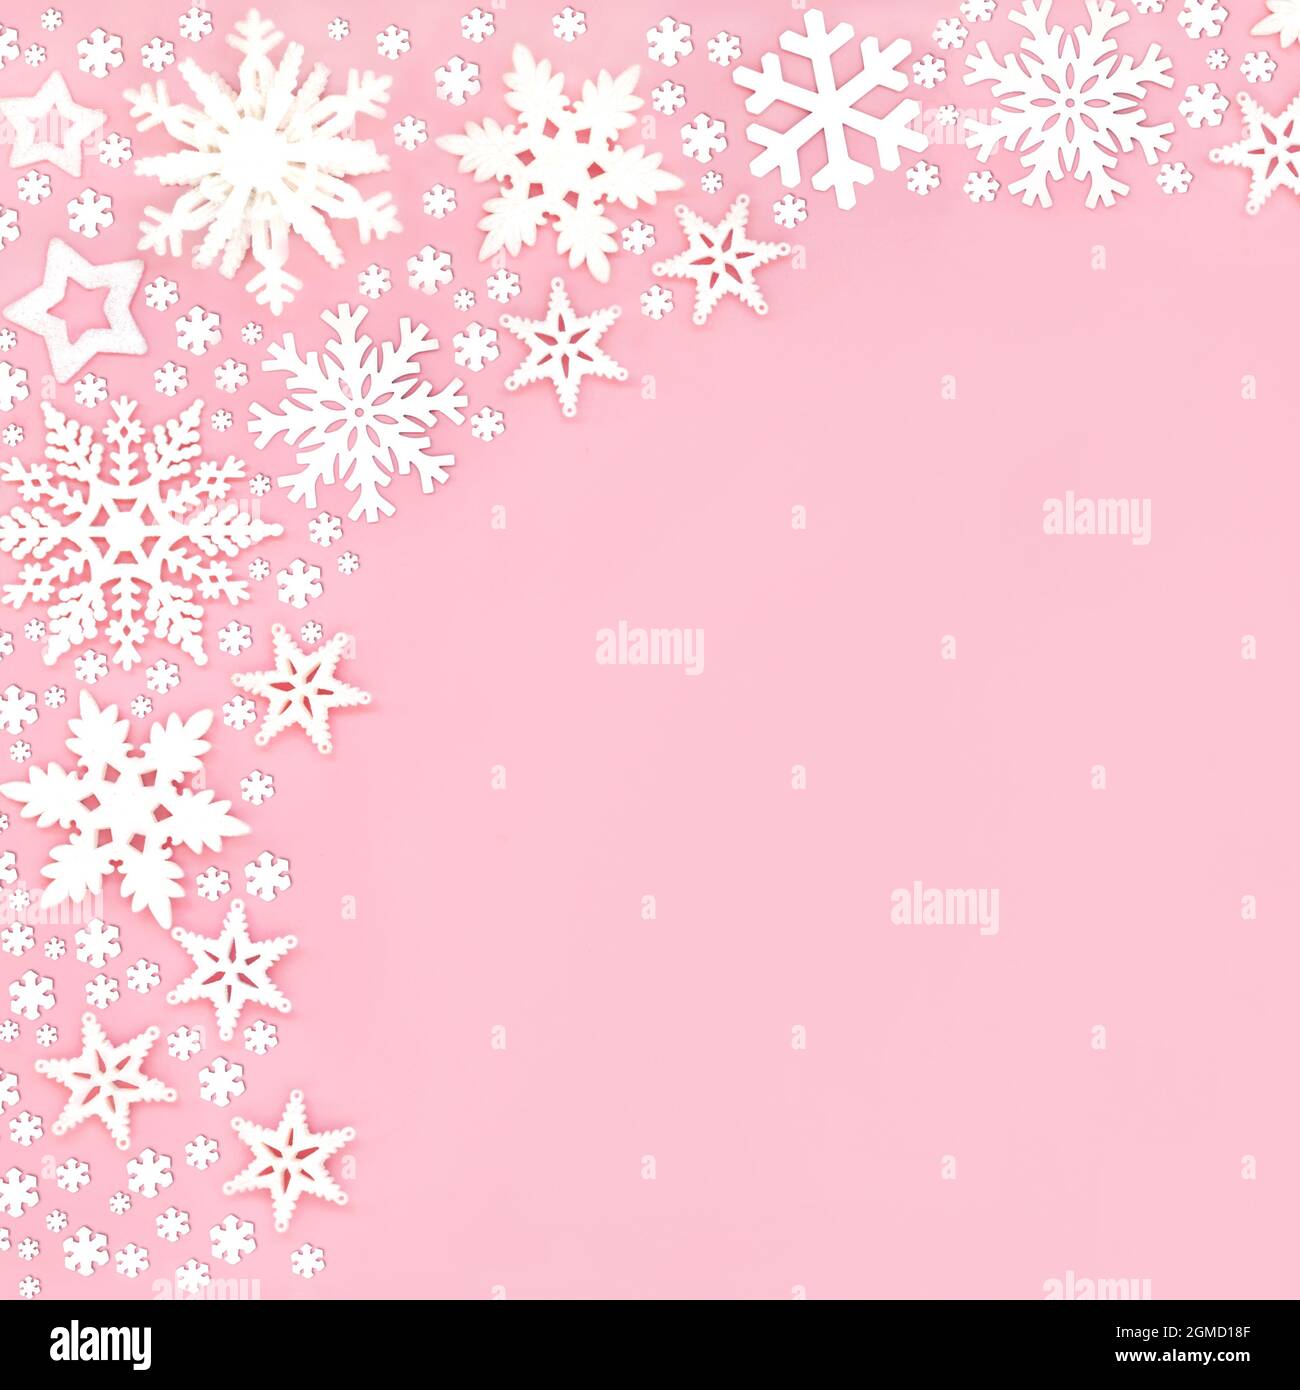 Christmas and New Year background border with white snowflake and ...